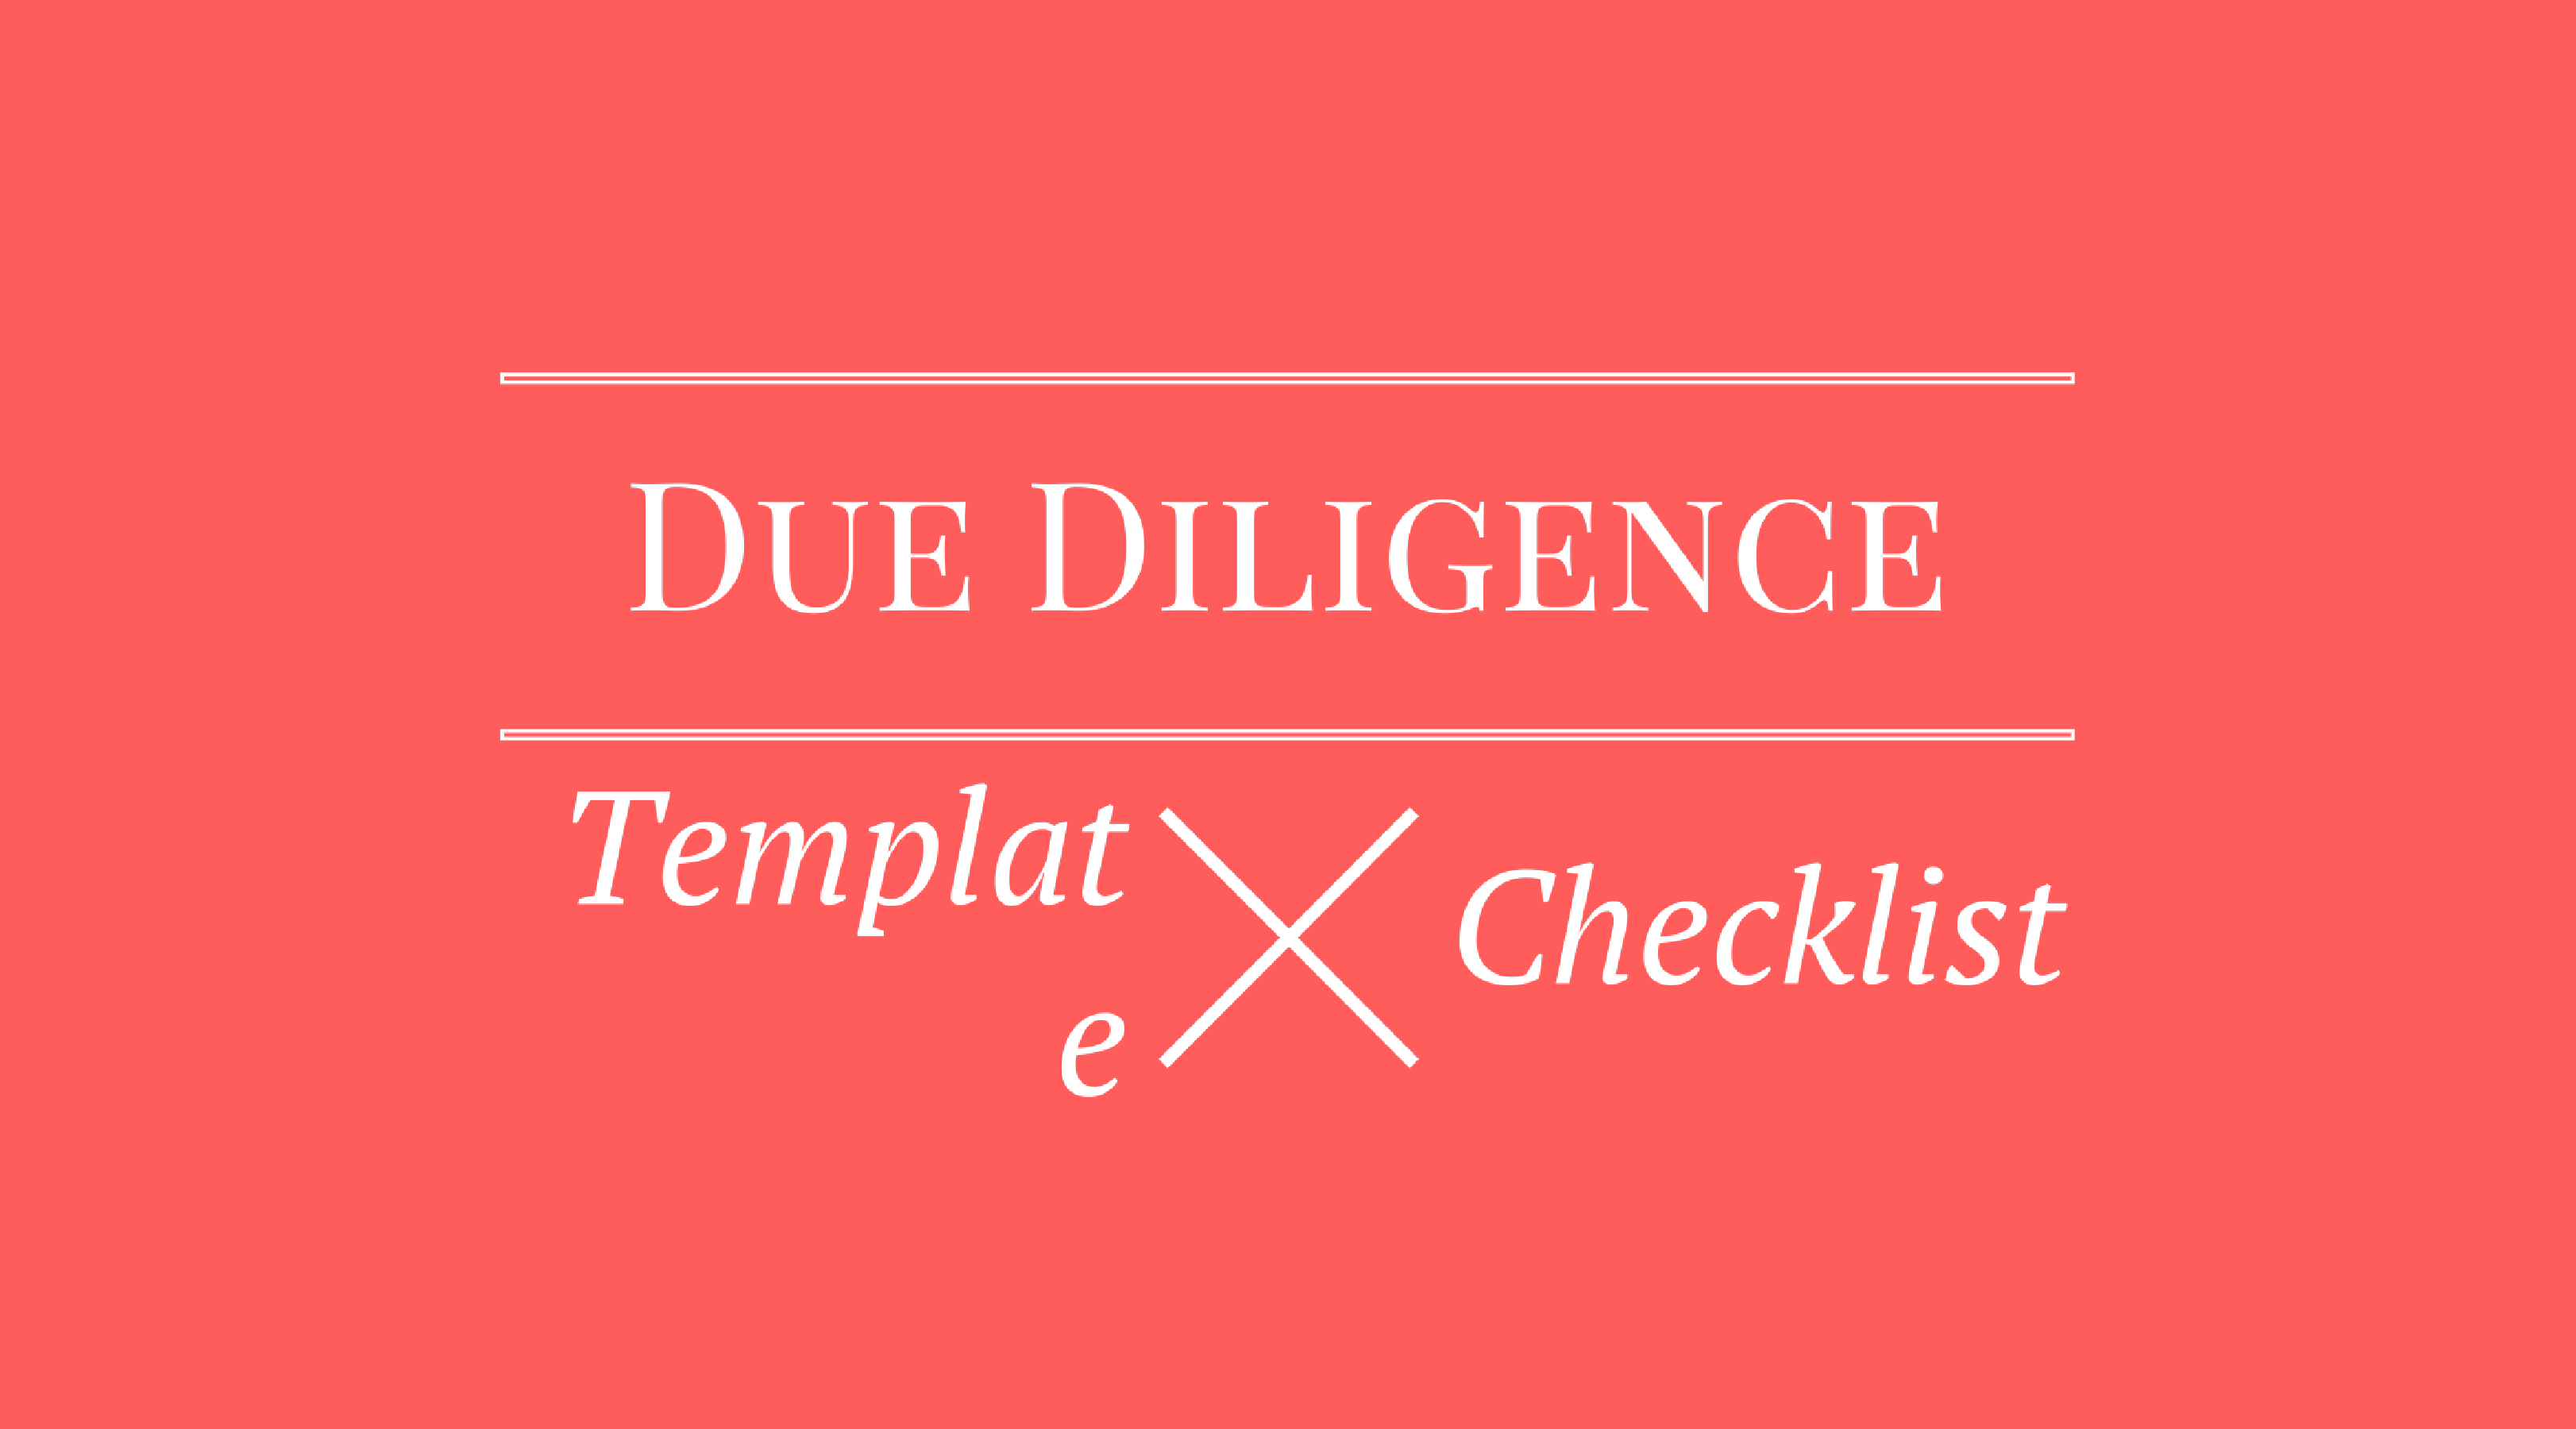 Due diligence checklist template startup venture capital fundraise